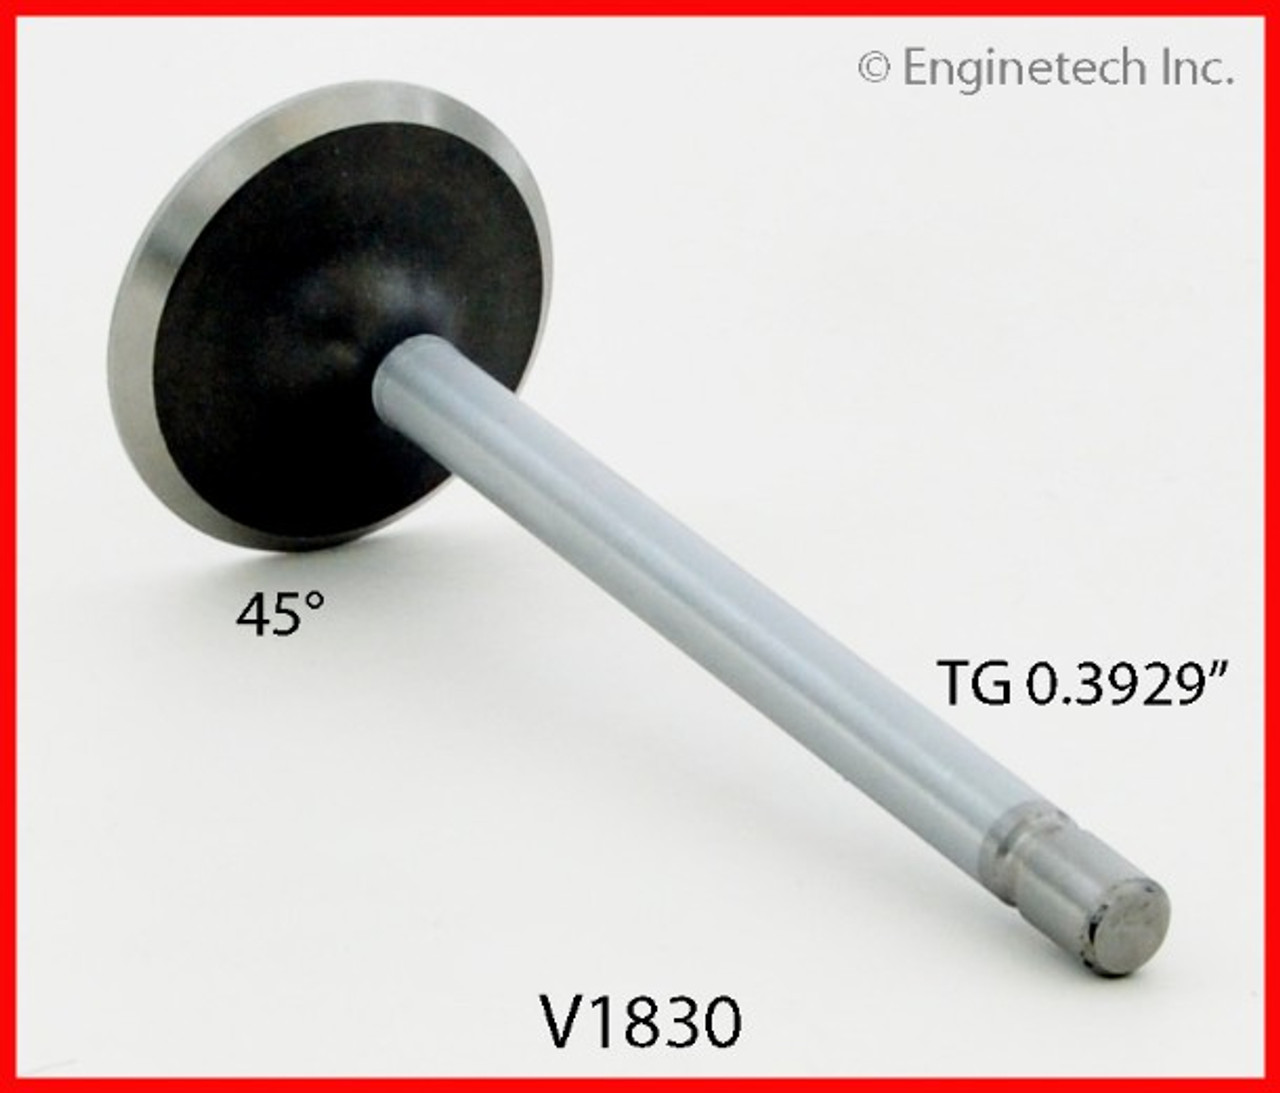 Intake Valve - 1987 Ford Country Squire 5.0L (V1830.K349)